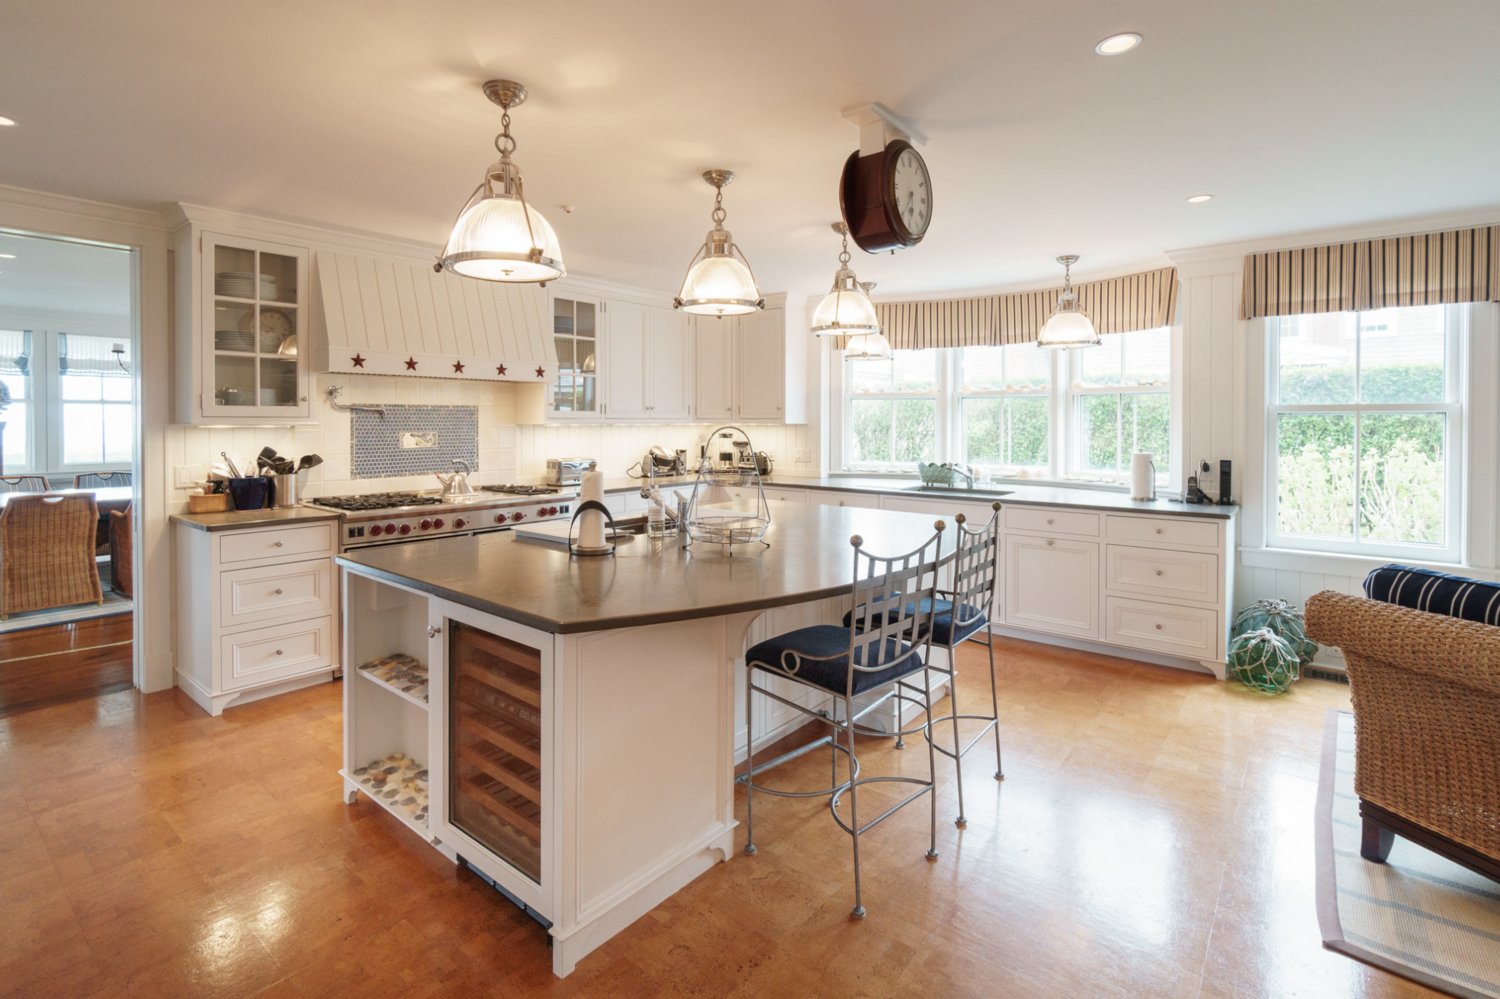 The spacious gourmet kitchen has high-end appliances including a six-burner Wolf gas range with a griddle and two ovens, and two Sub-Zero refrigerators.